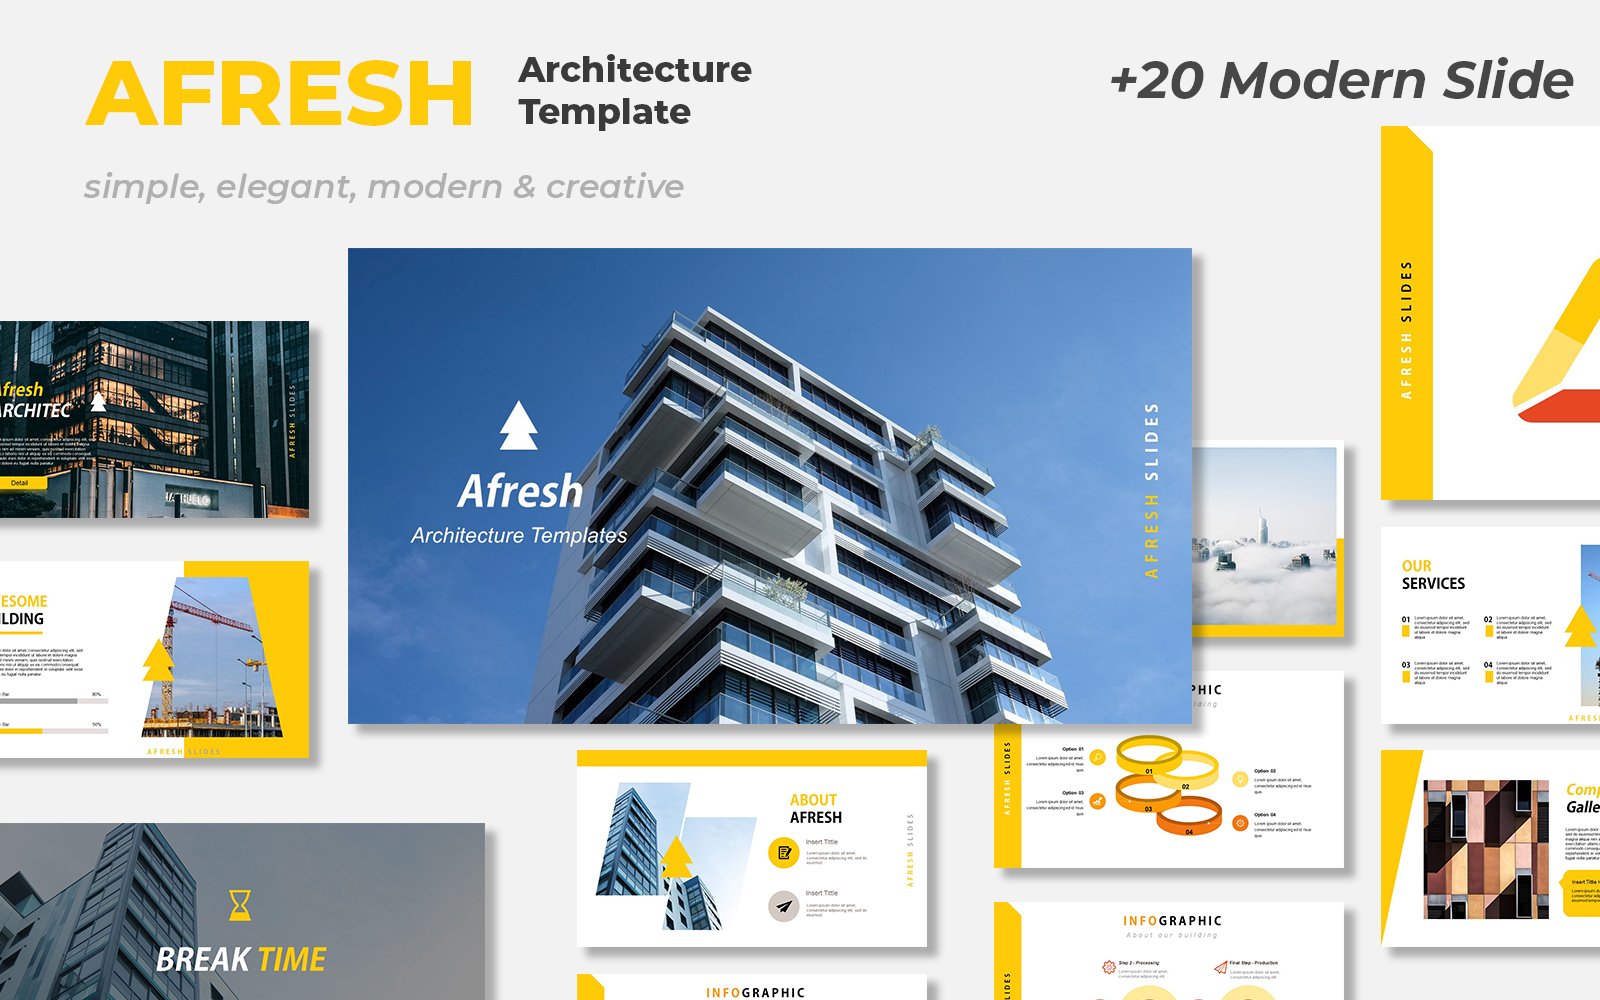 Template #213633 Building Arcithecture Webdesign Template - Logo template Preview